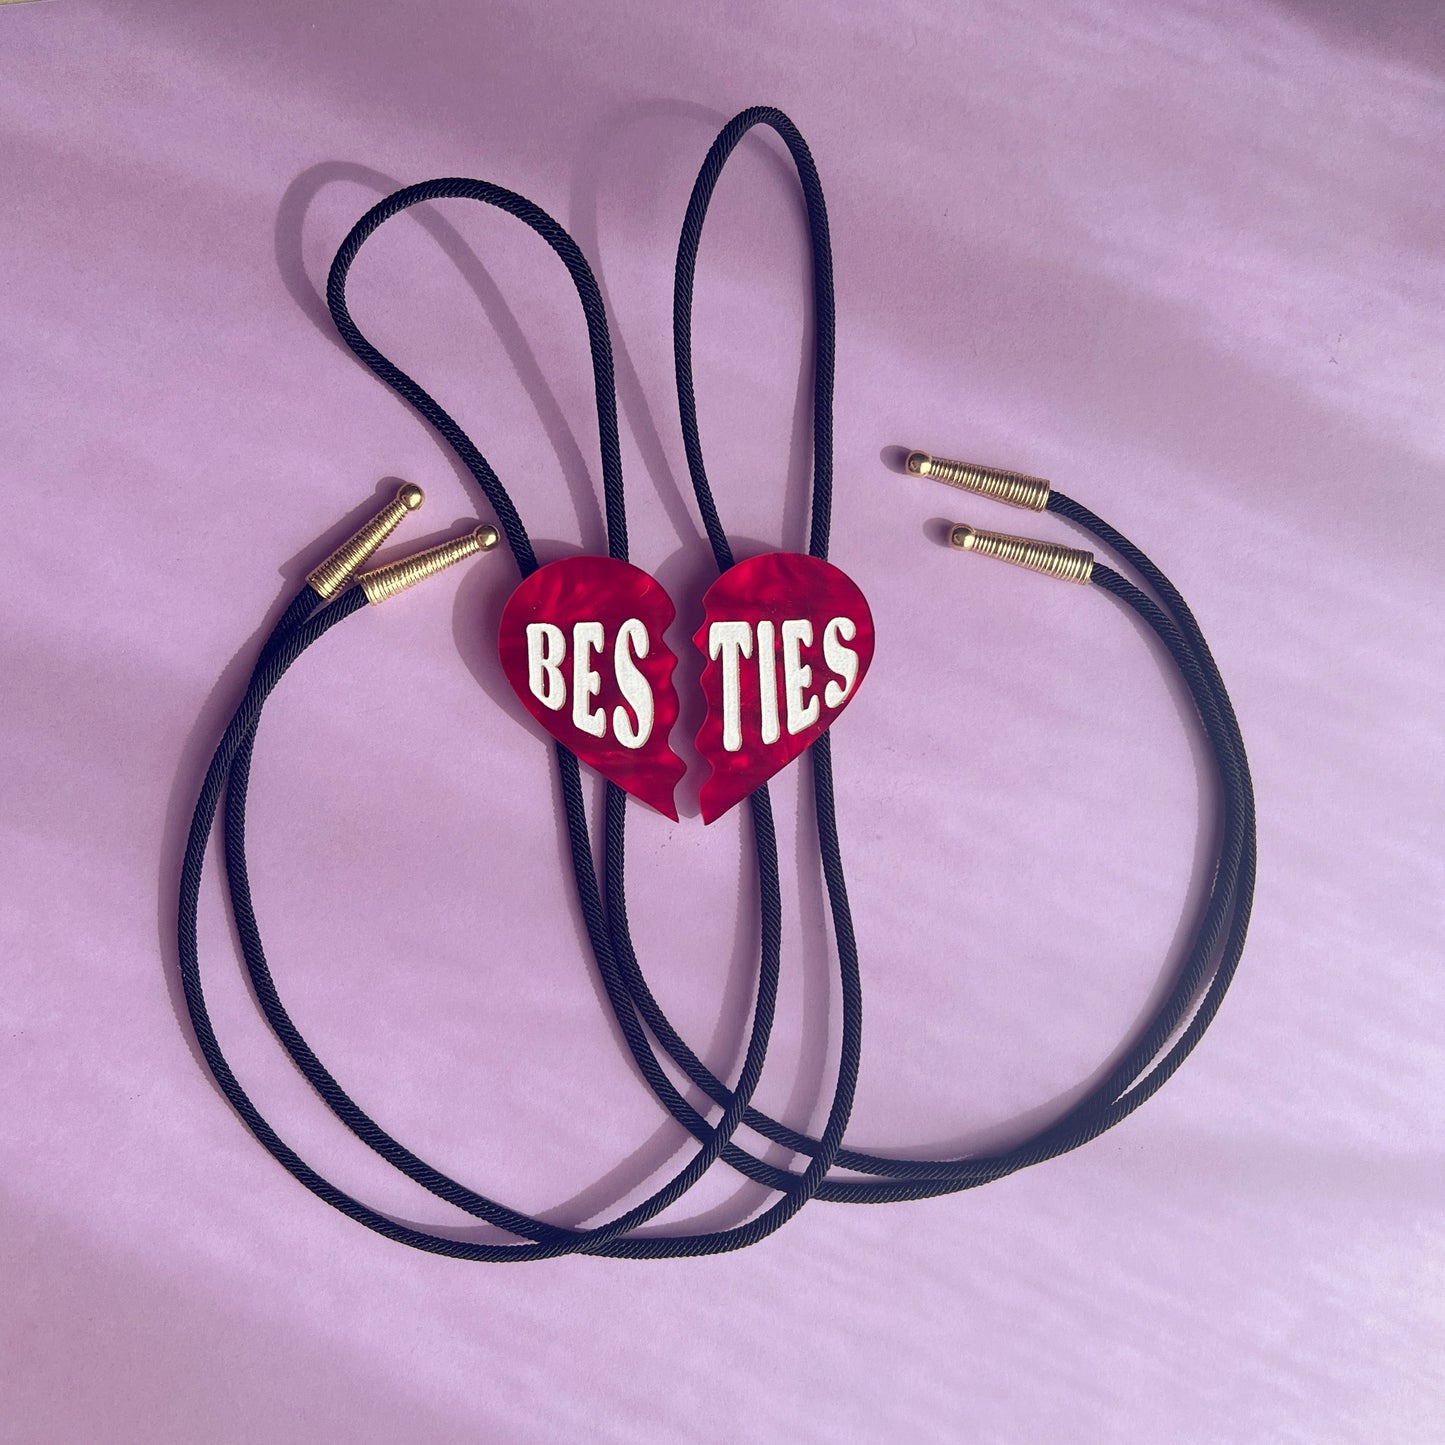 Besties bolo ties (comes as a set)